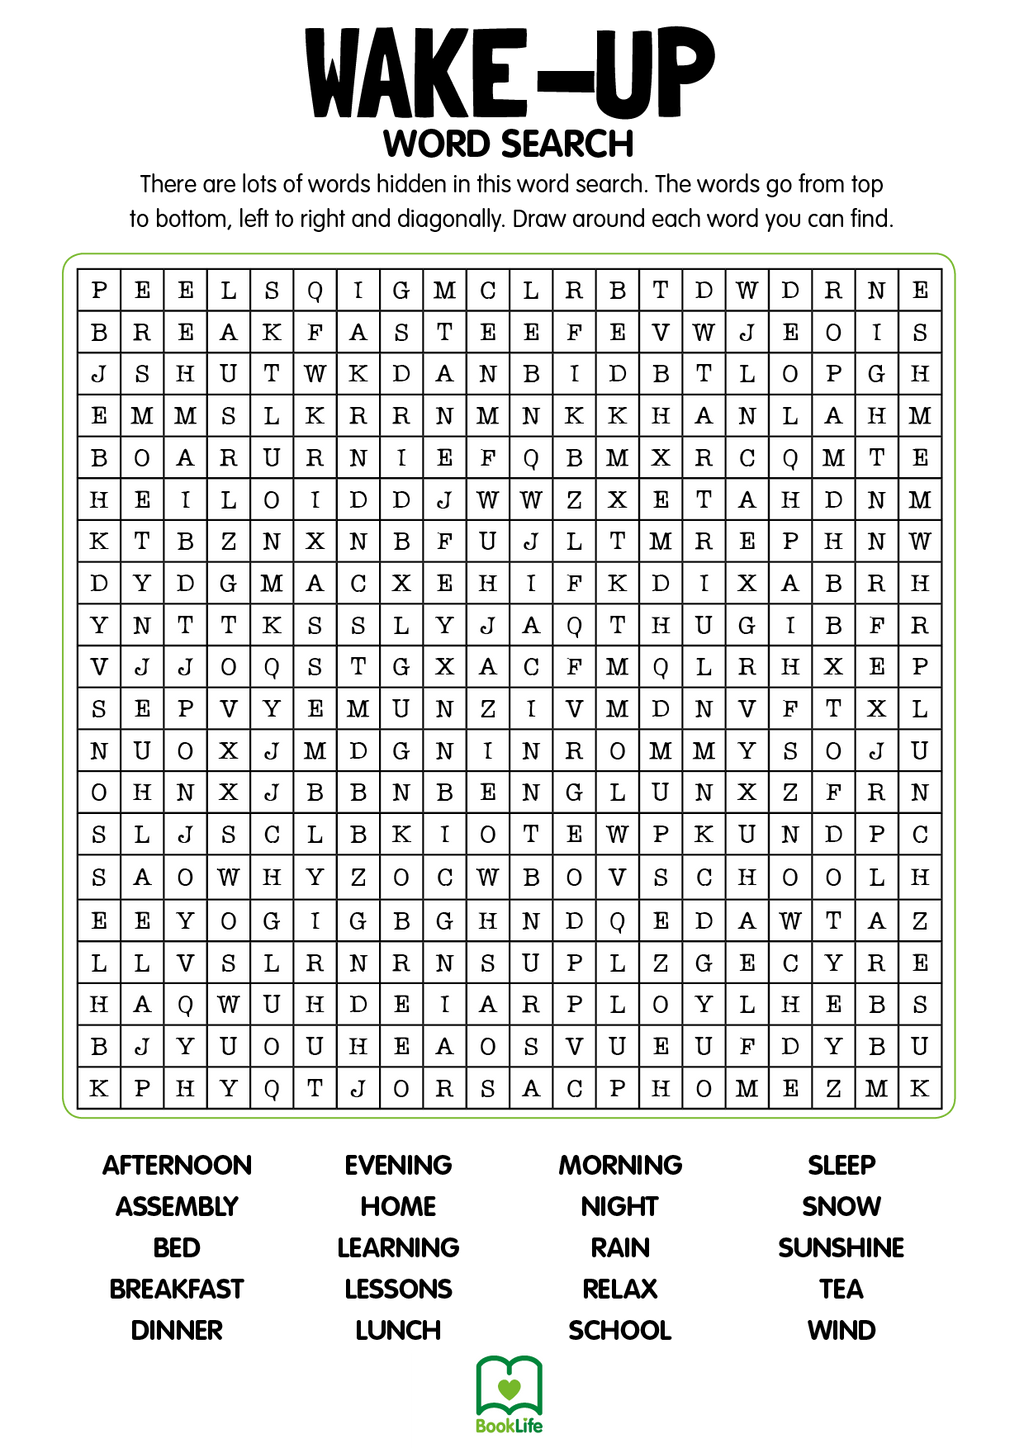 Free Wake-Up Word Search | BookLife